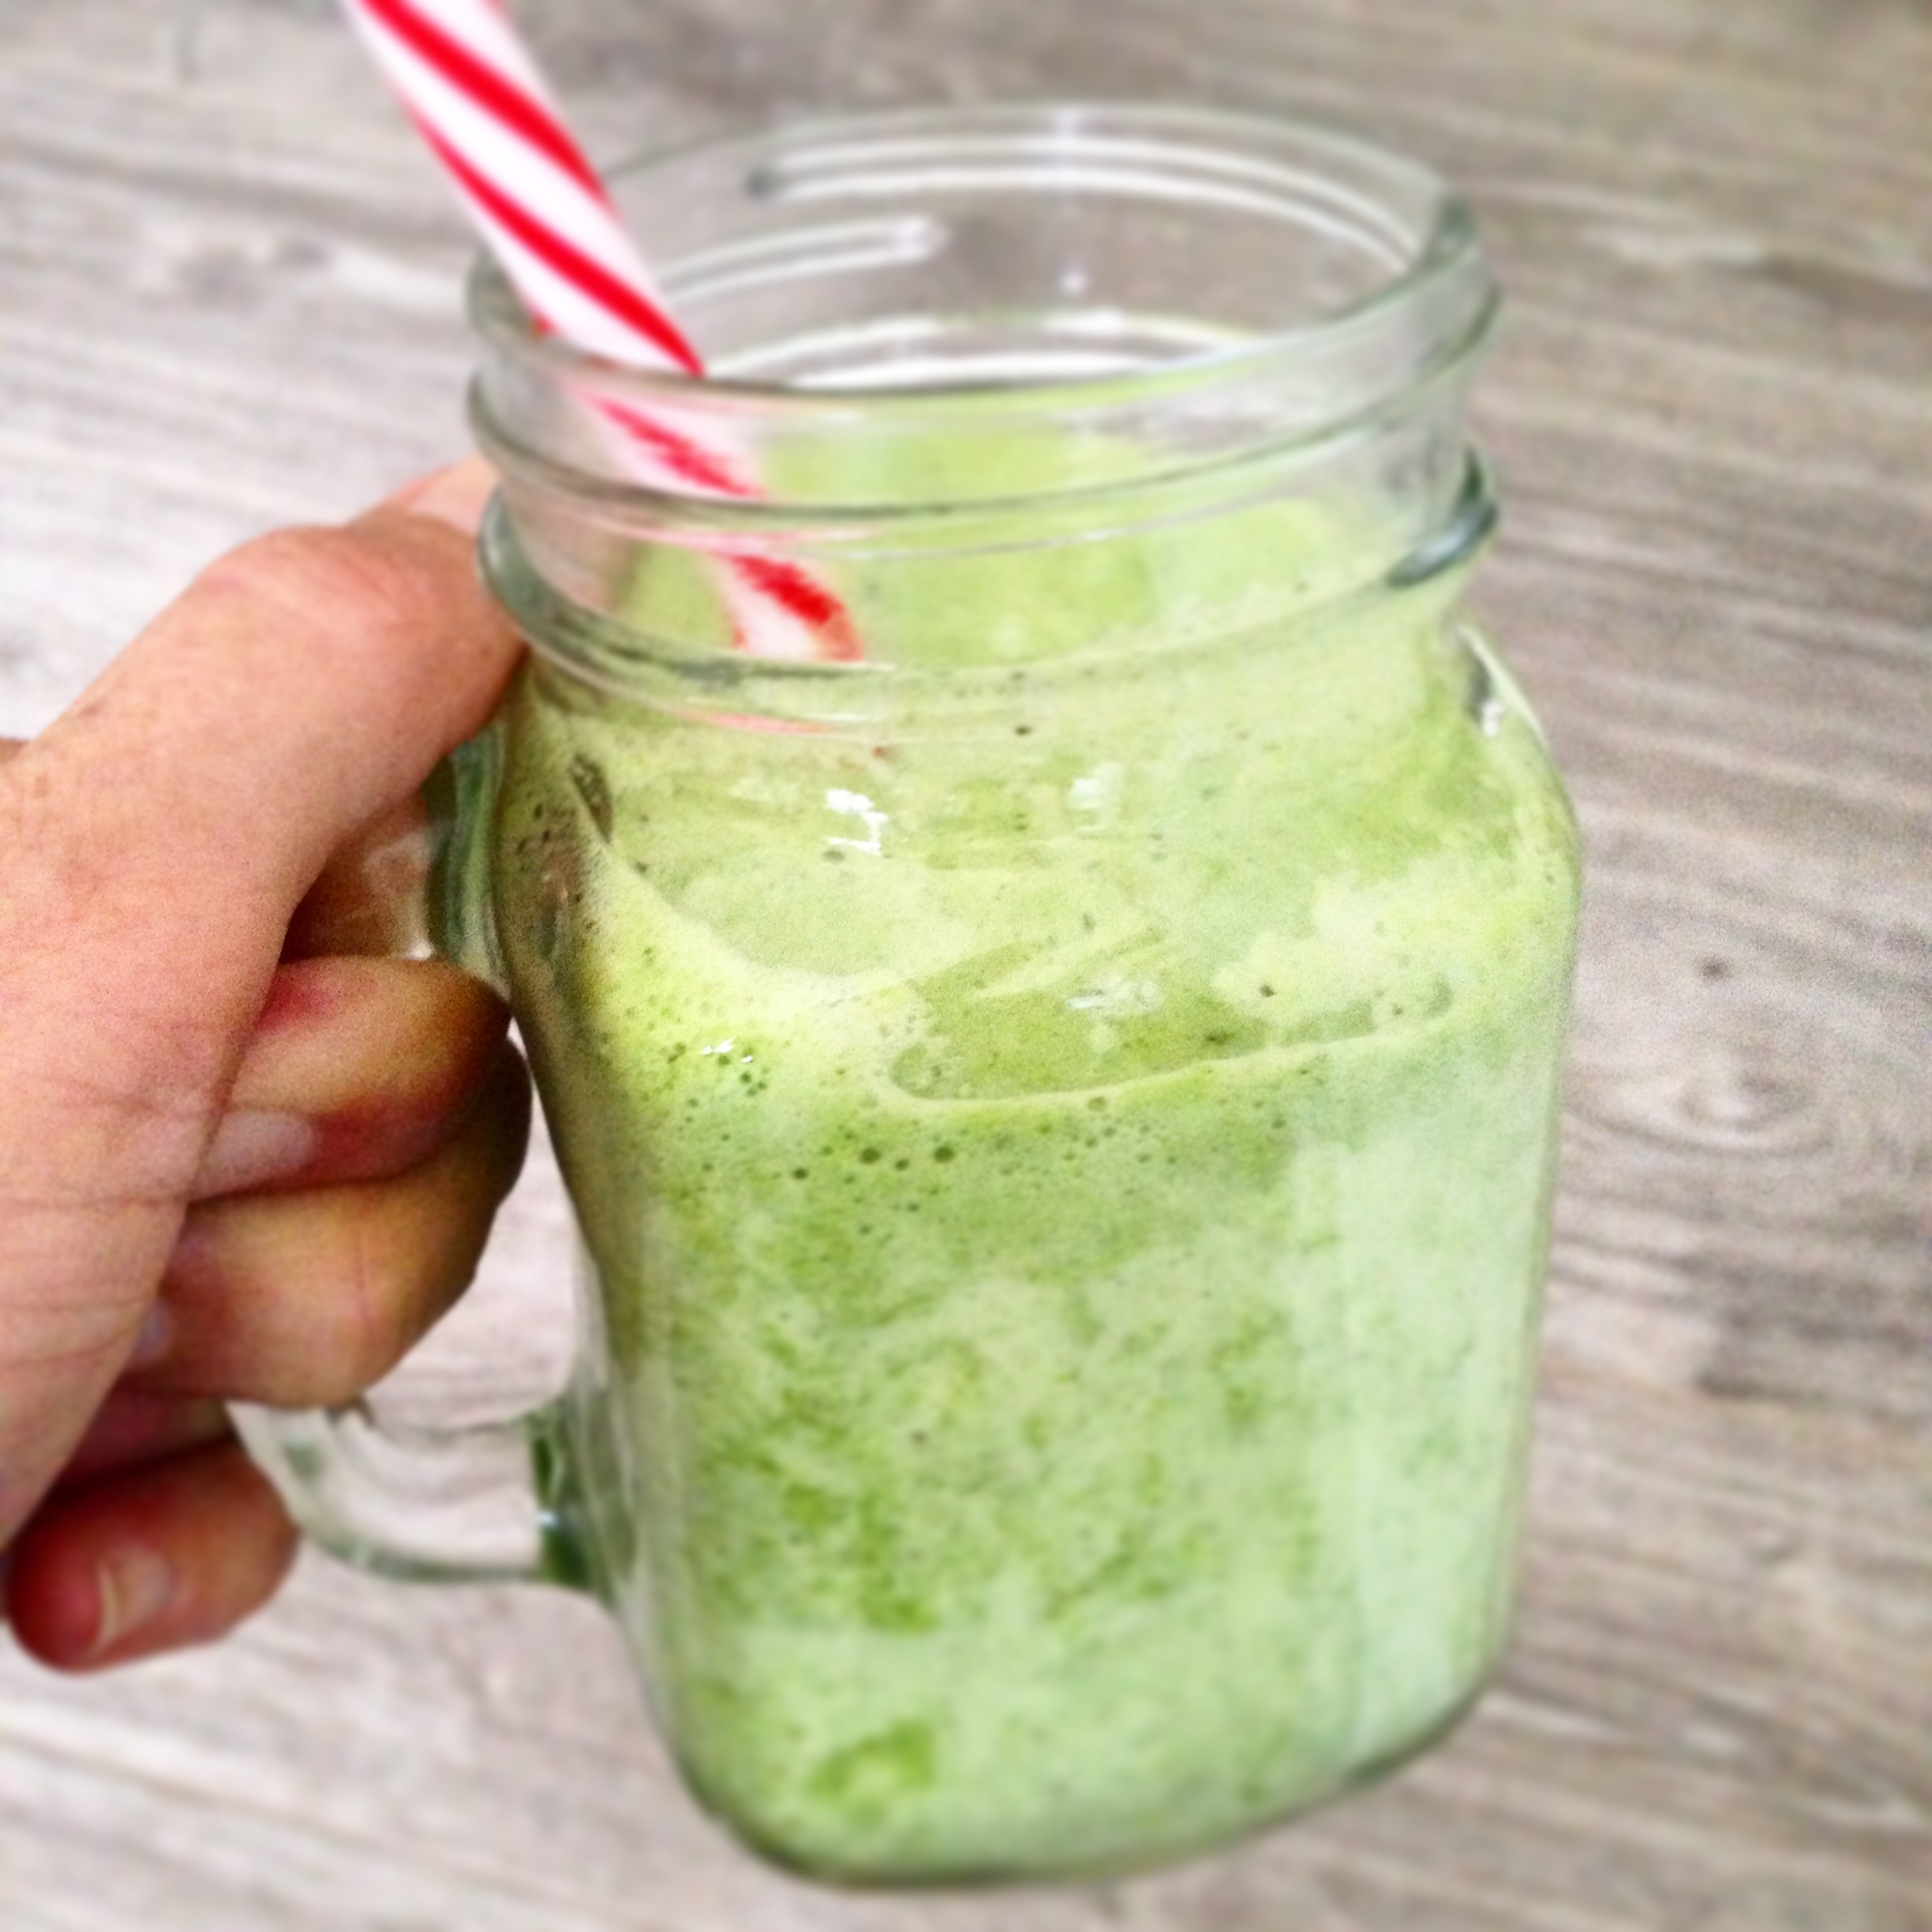 Try this easy green smoothie for a healthy breakfast or snack any time.